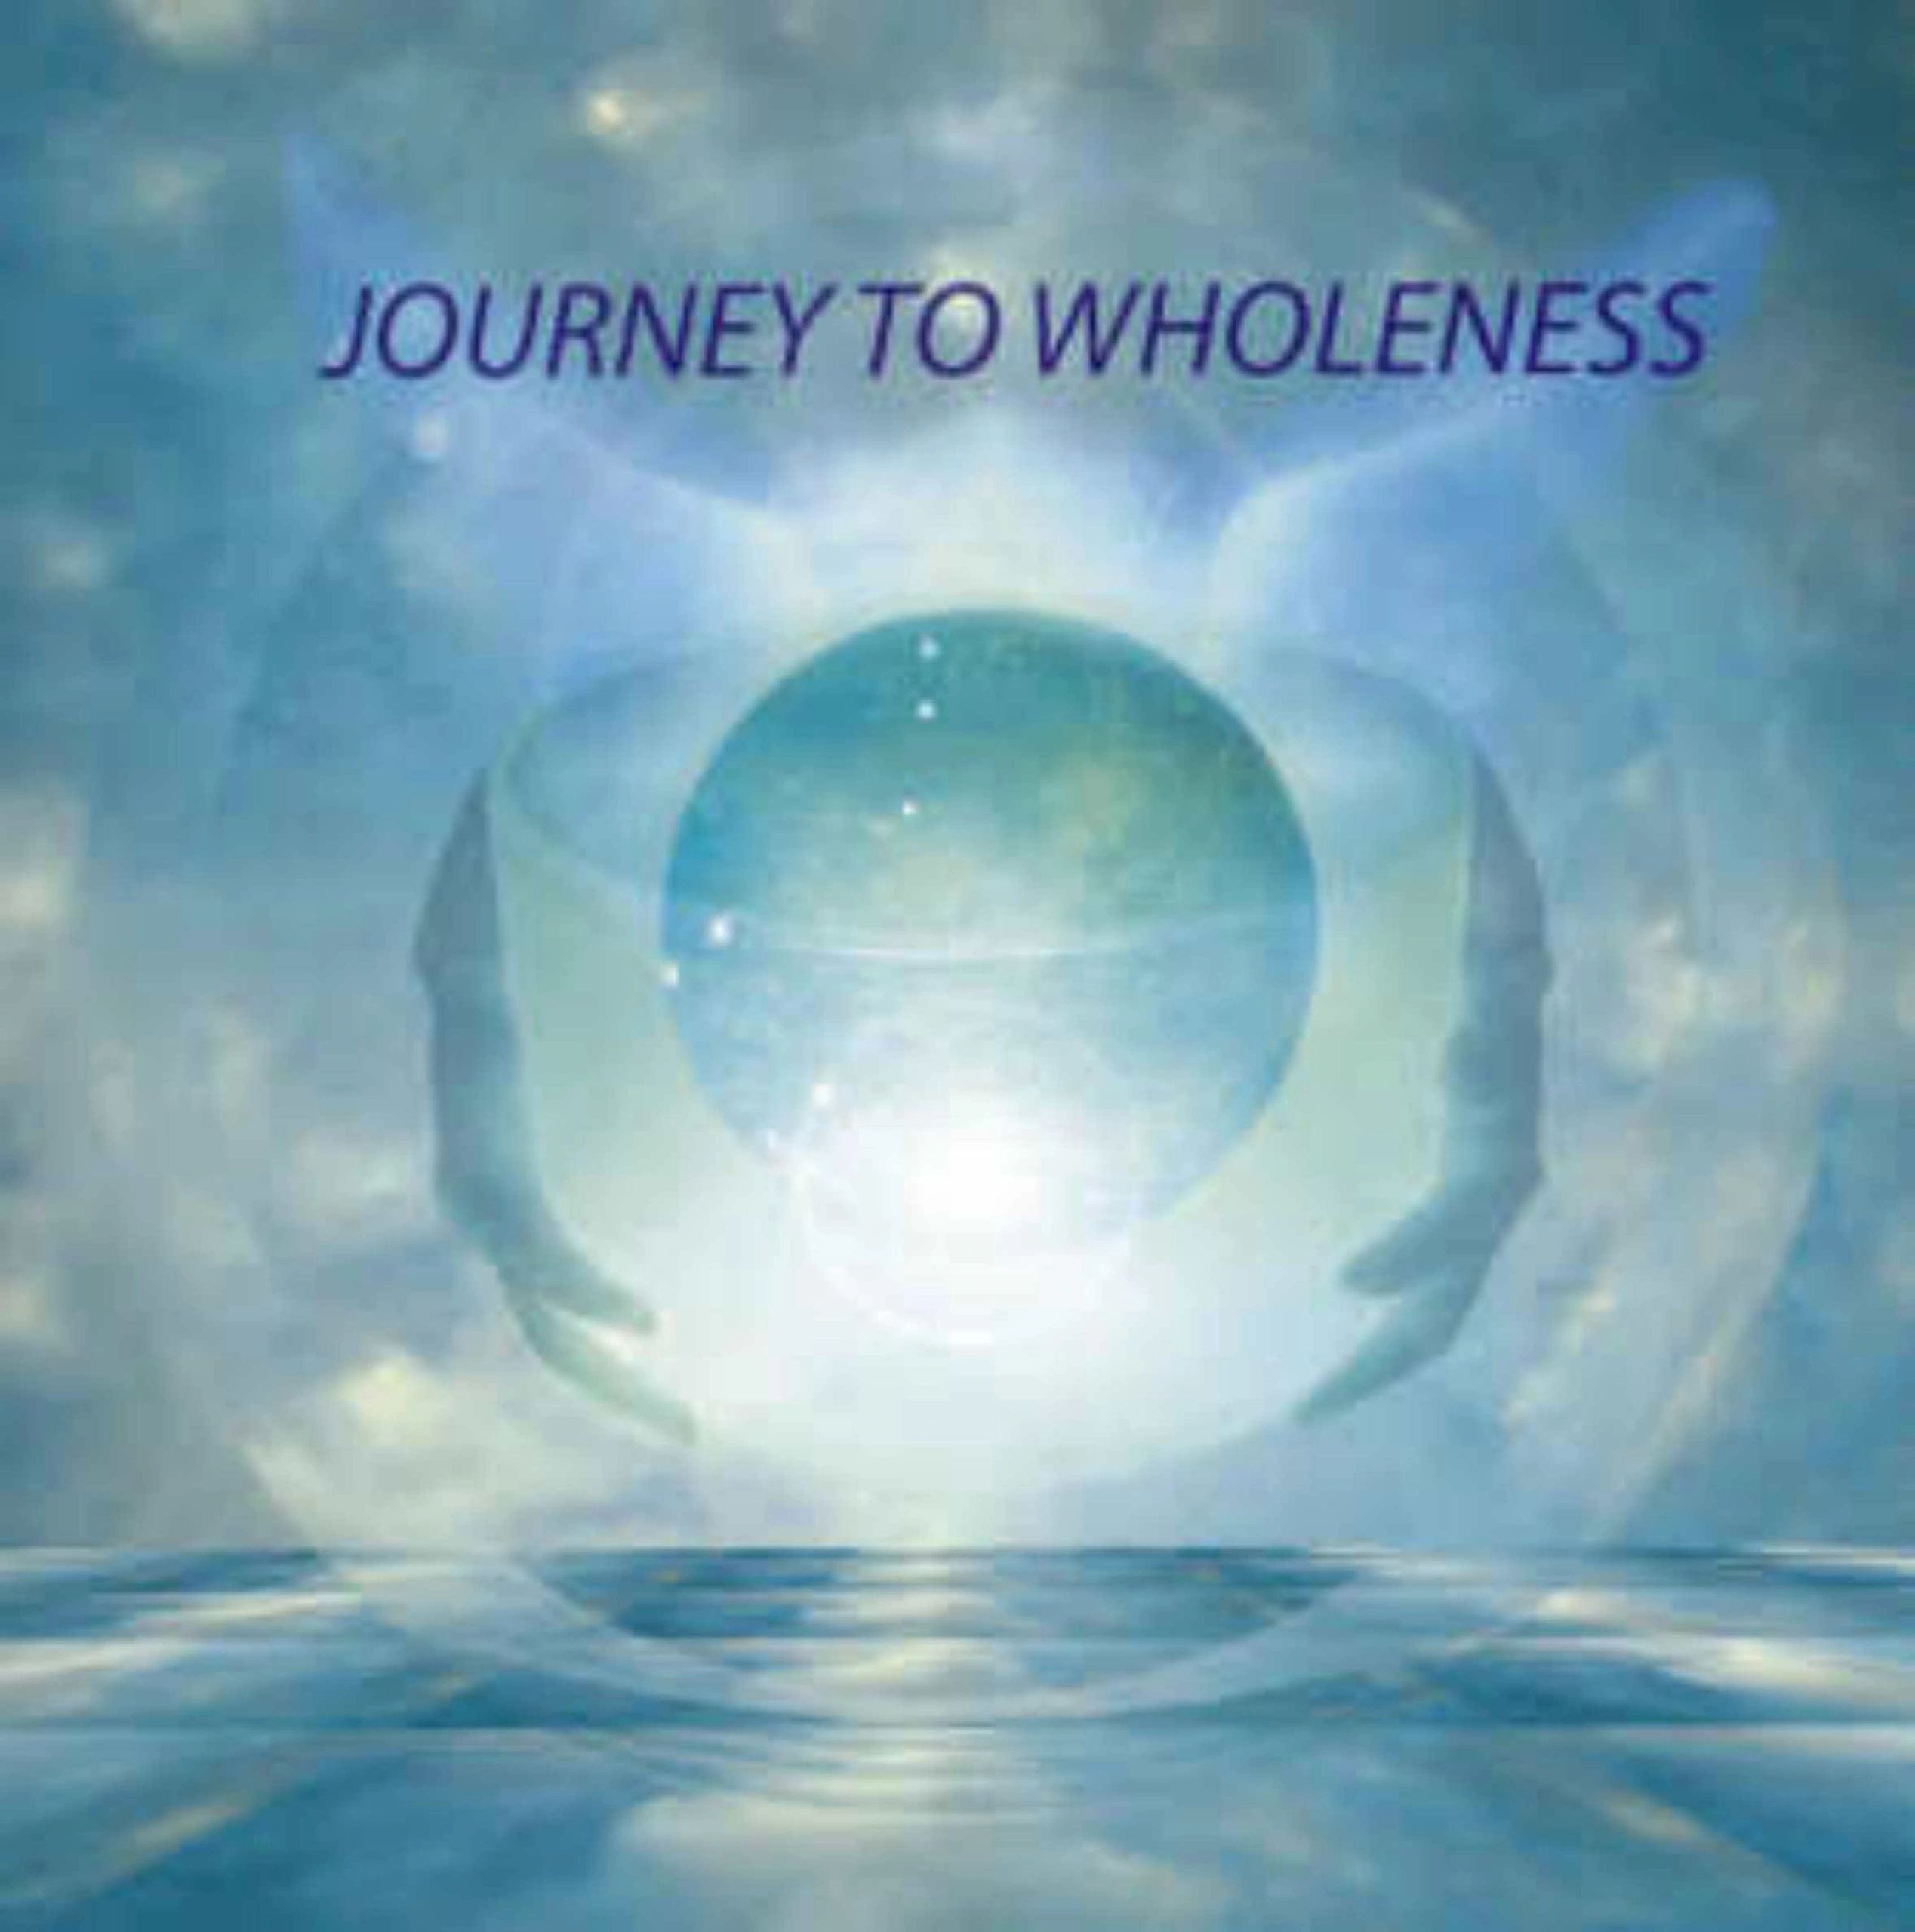 my journey to wholeness